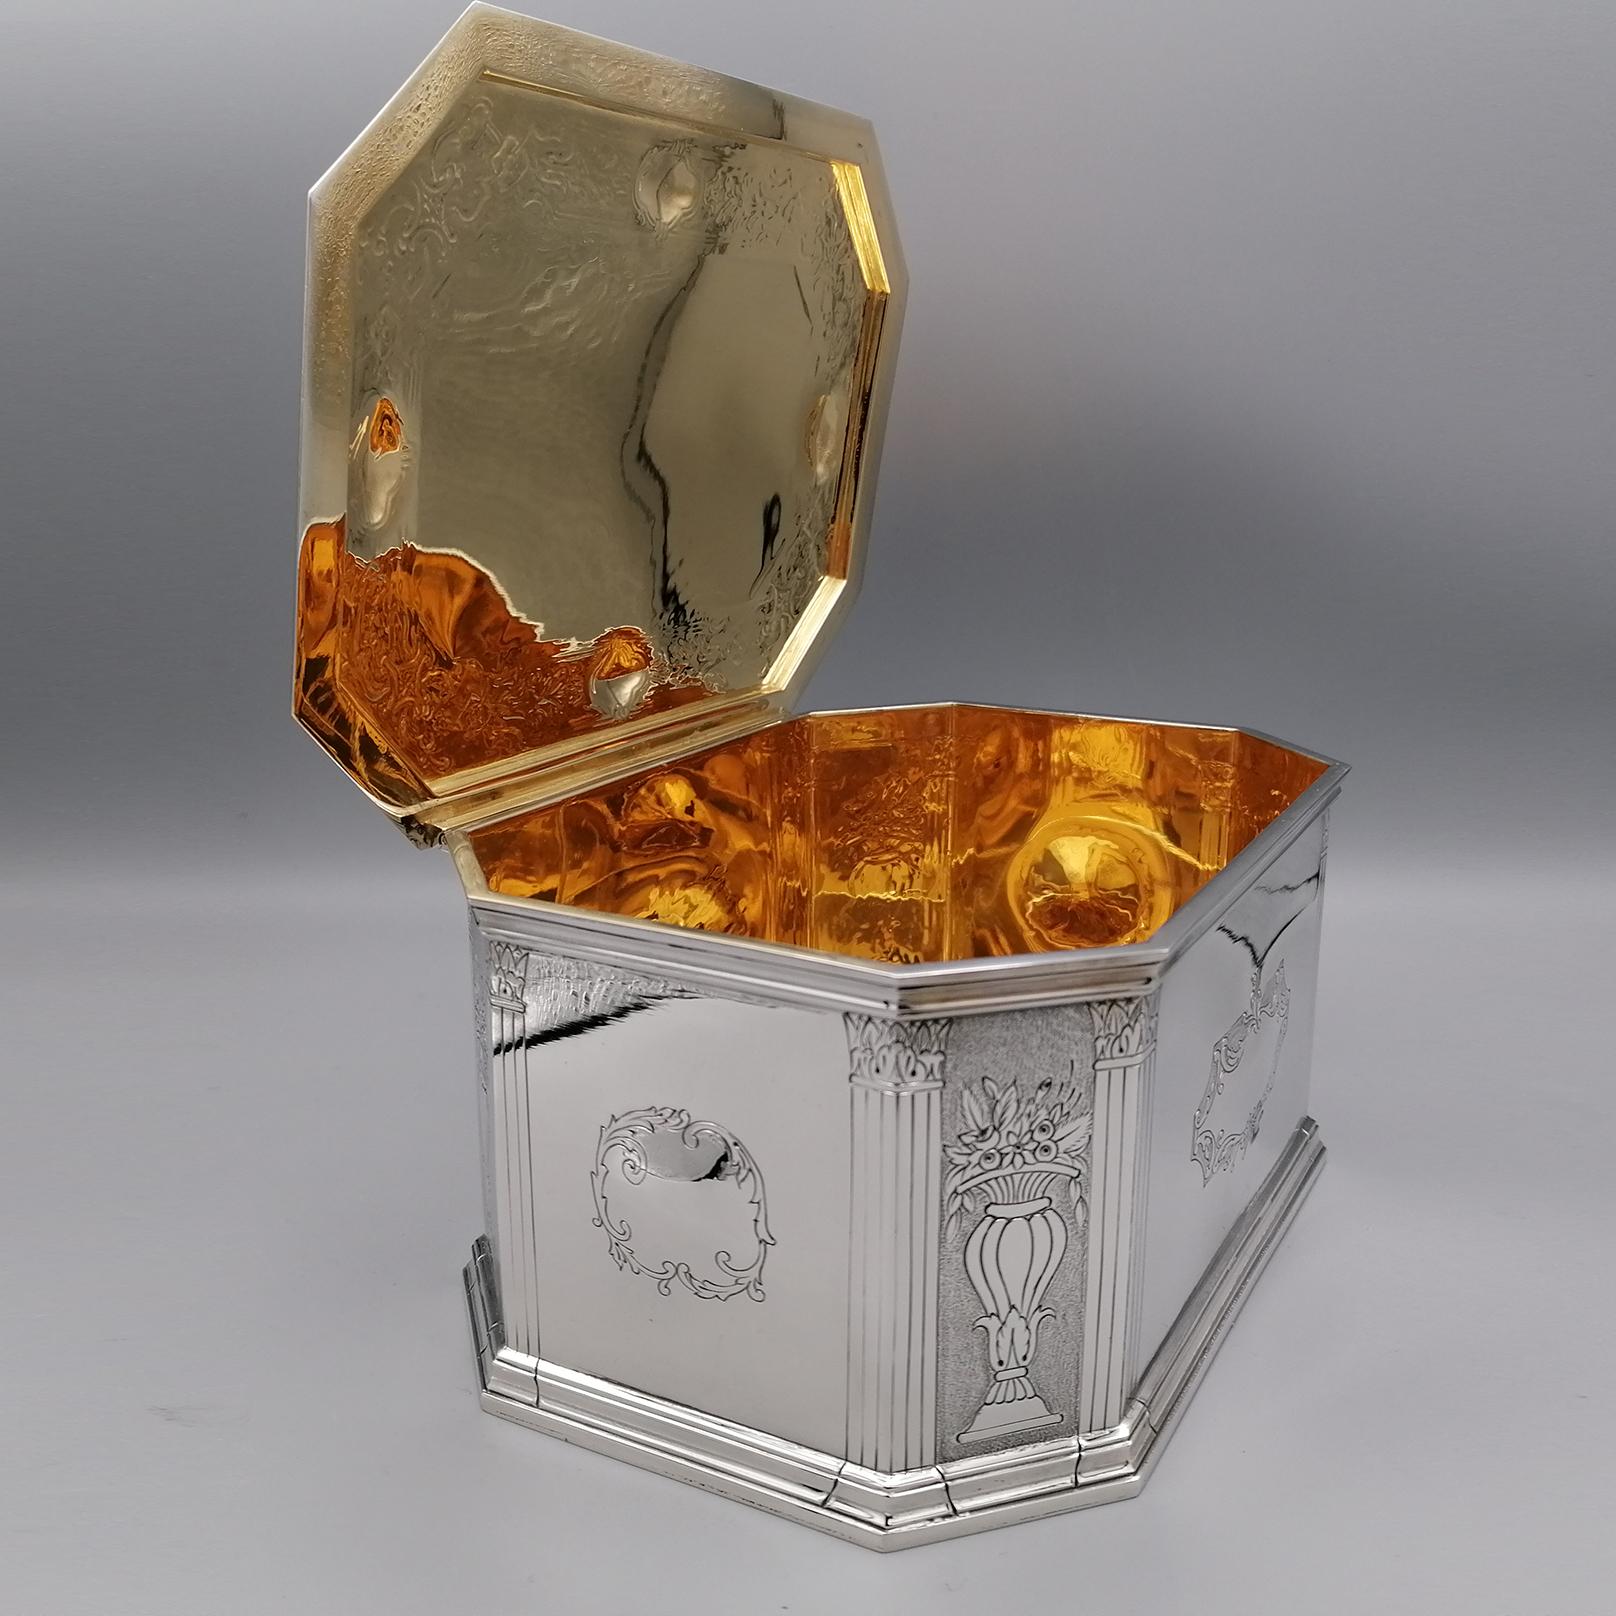 Rectangular/octagonal table box in 925 silver.
The box was completely handmade in Florence at the end of the last century.
Engraved with floral and abstract motifs, it has been finished with the knurling technique, created to highlight the designs